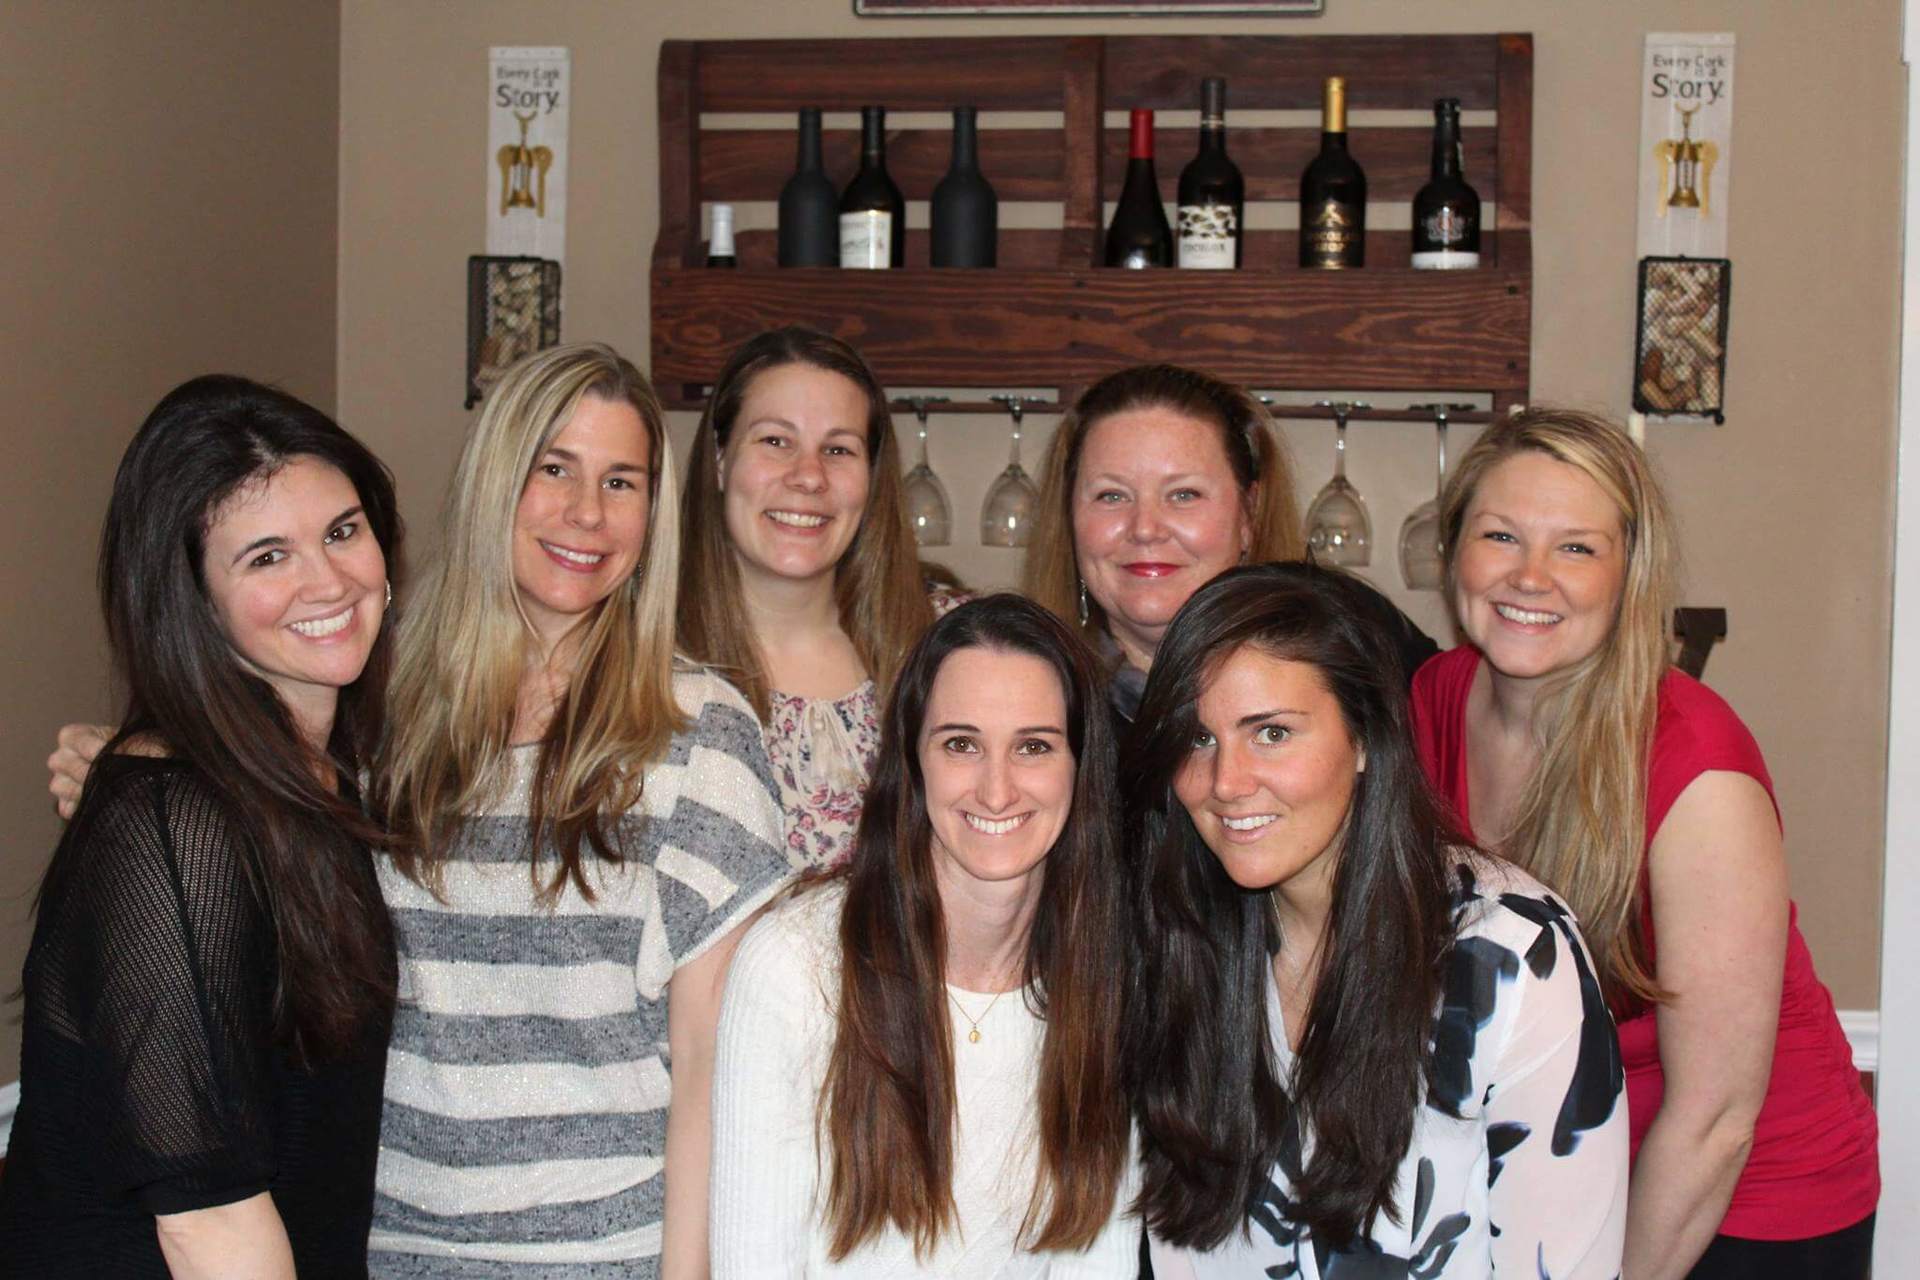 7 women smiling in front of a wine rack